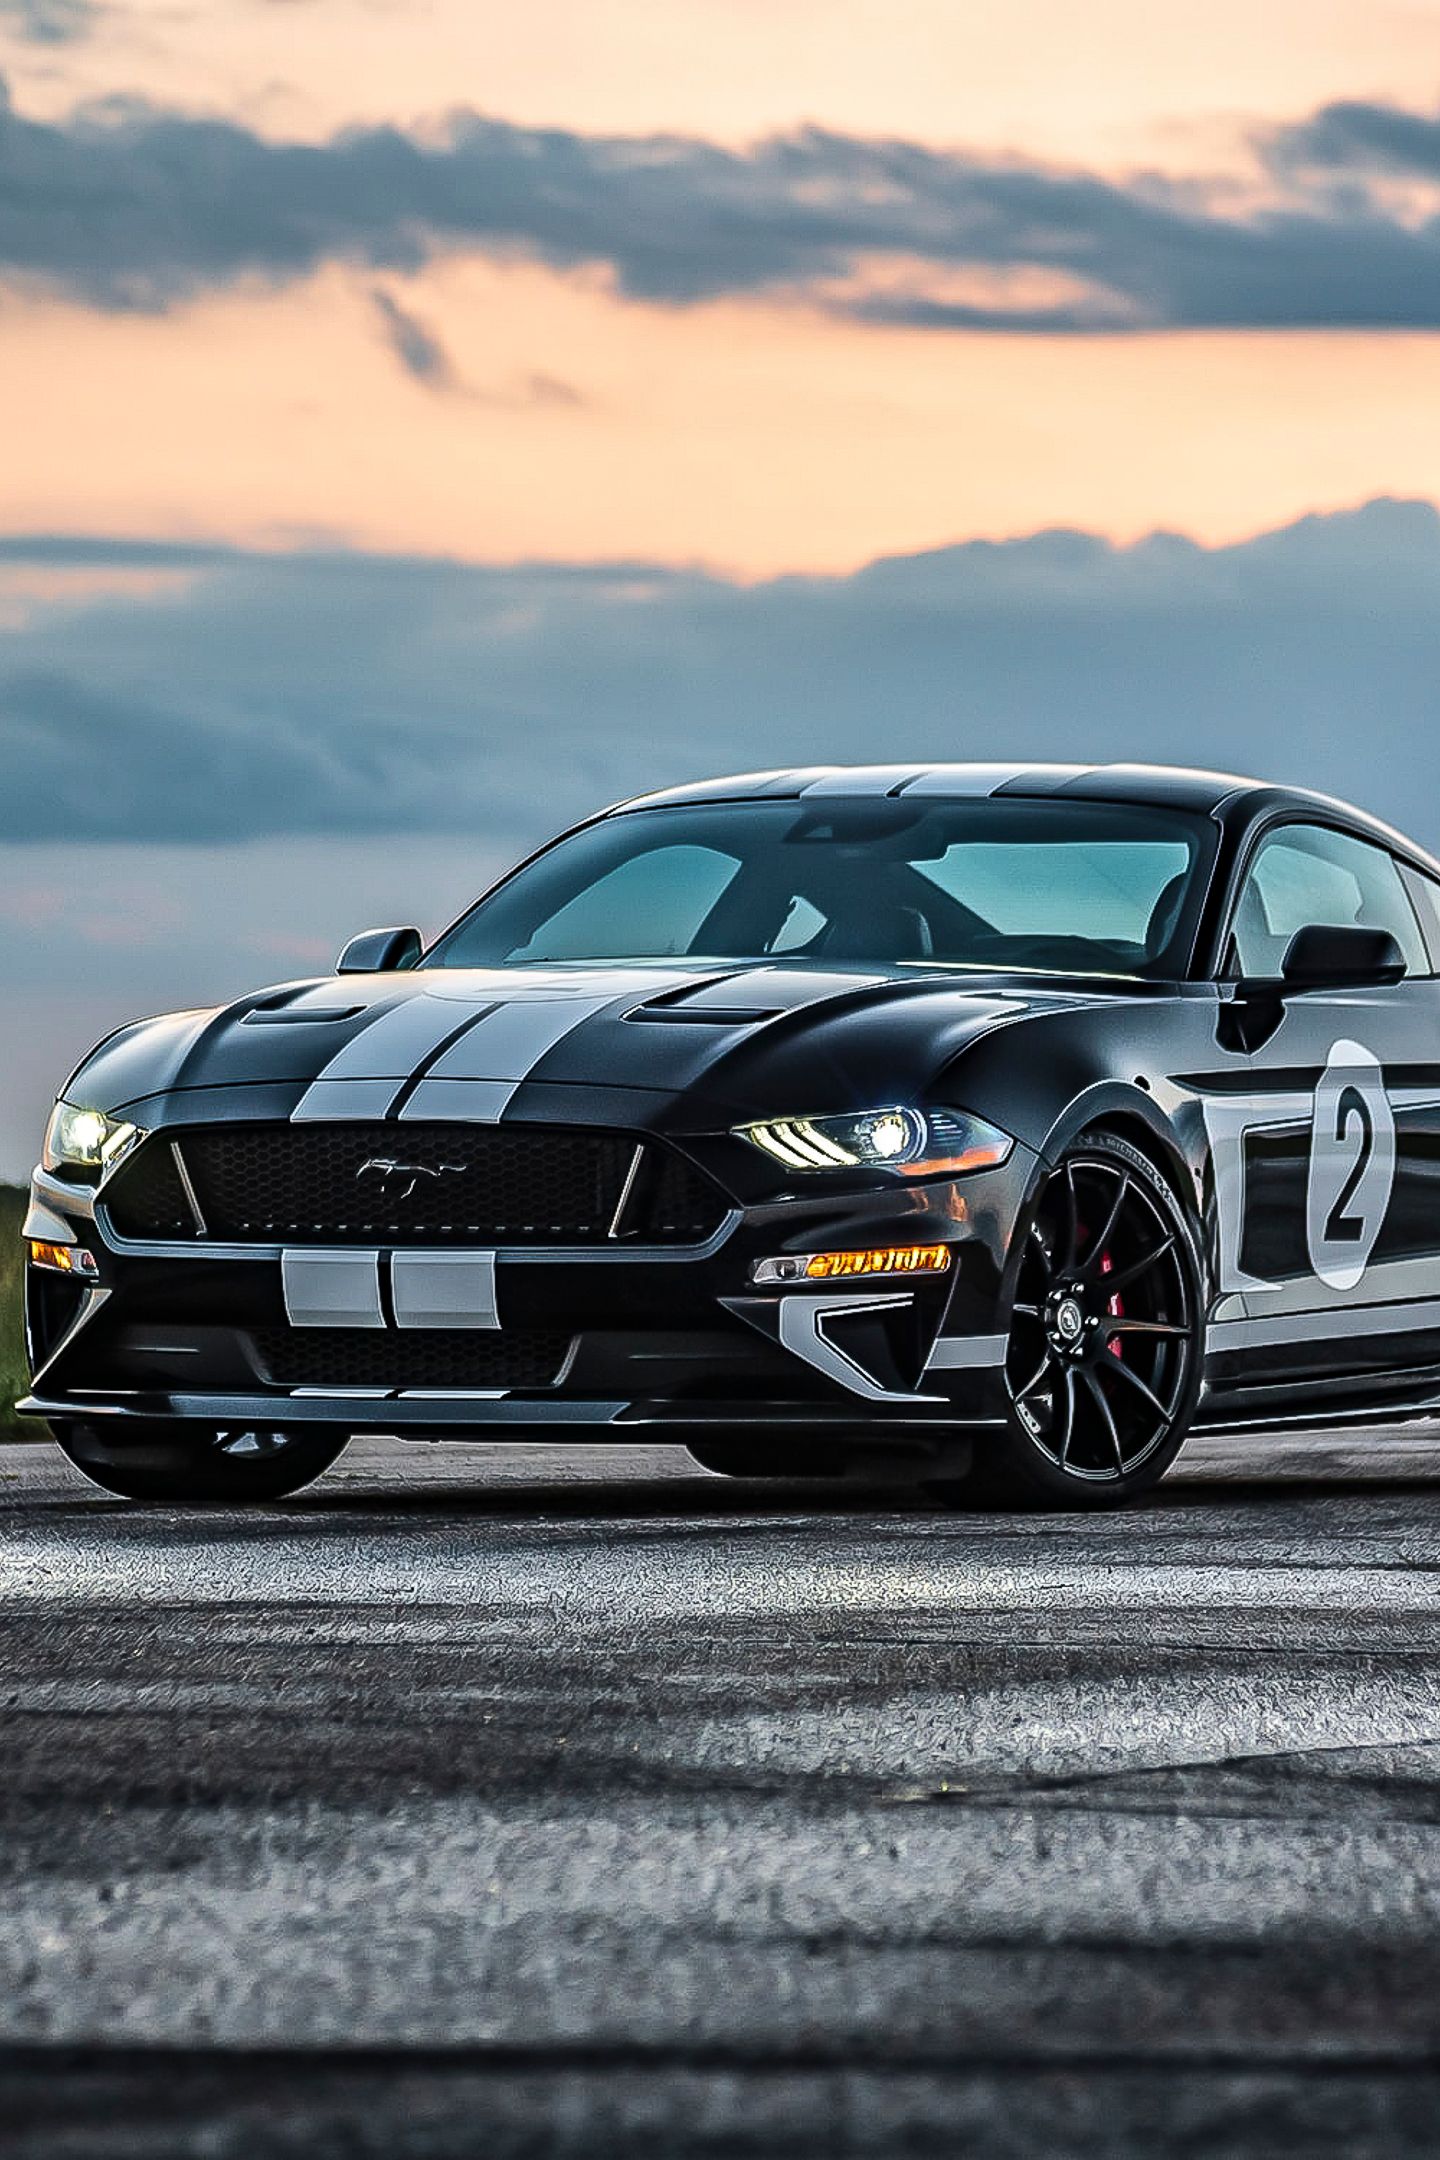 2021 Ford Mustang Legend Edition by Hennessey